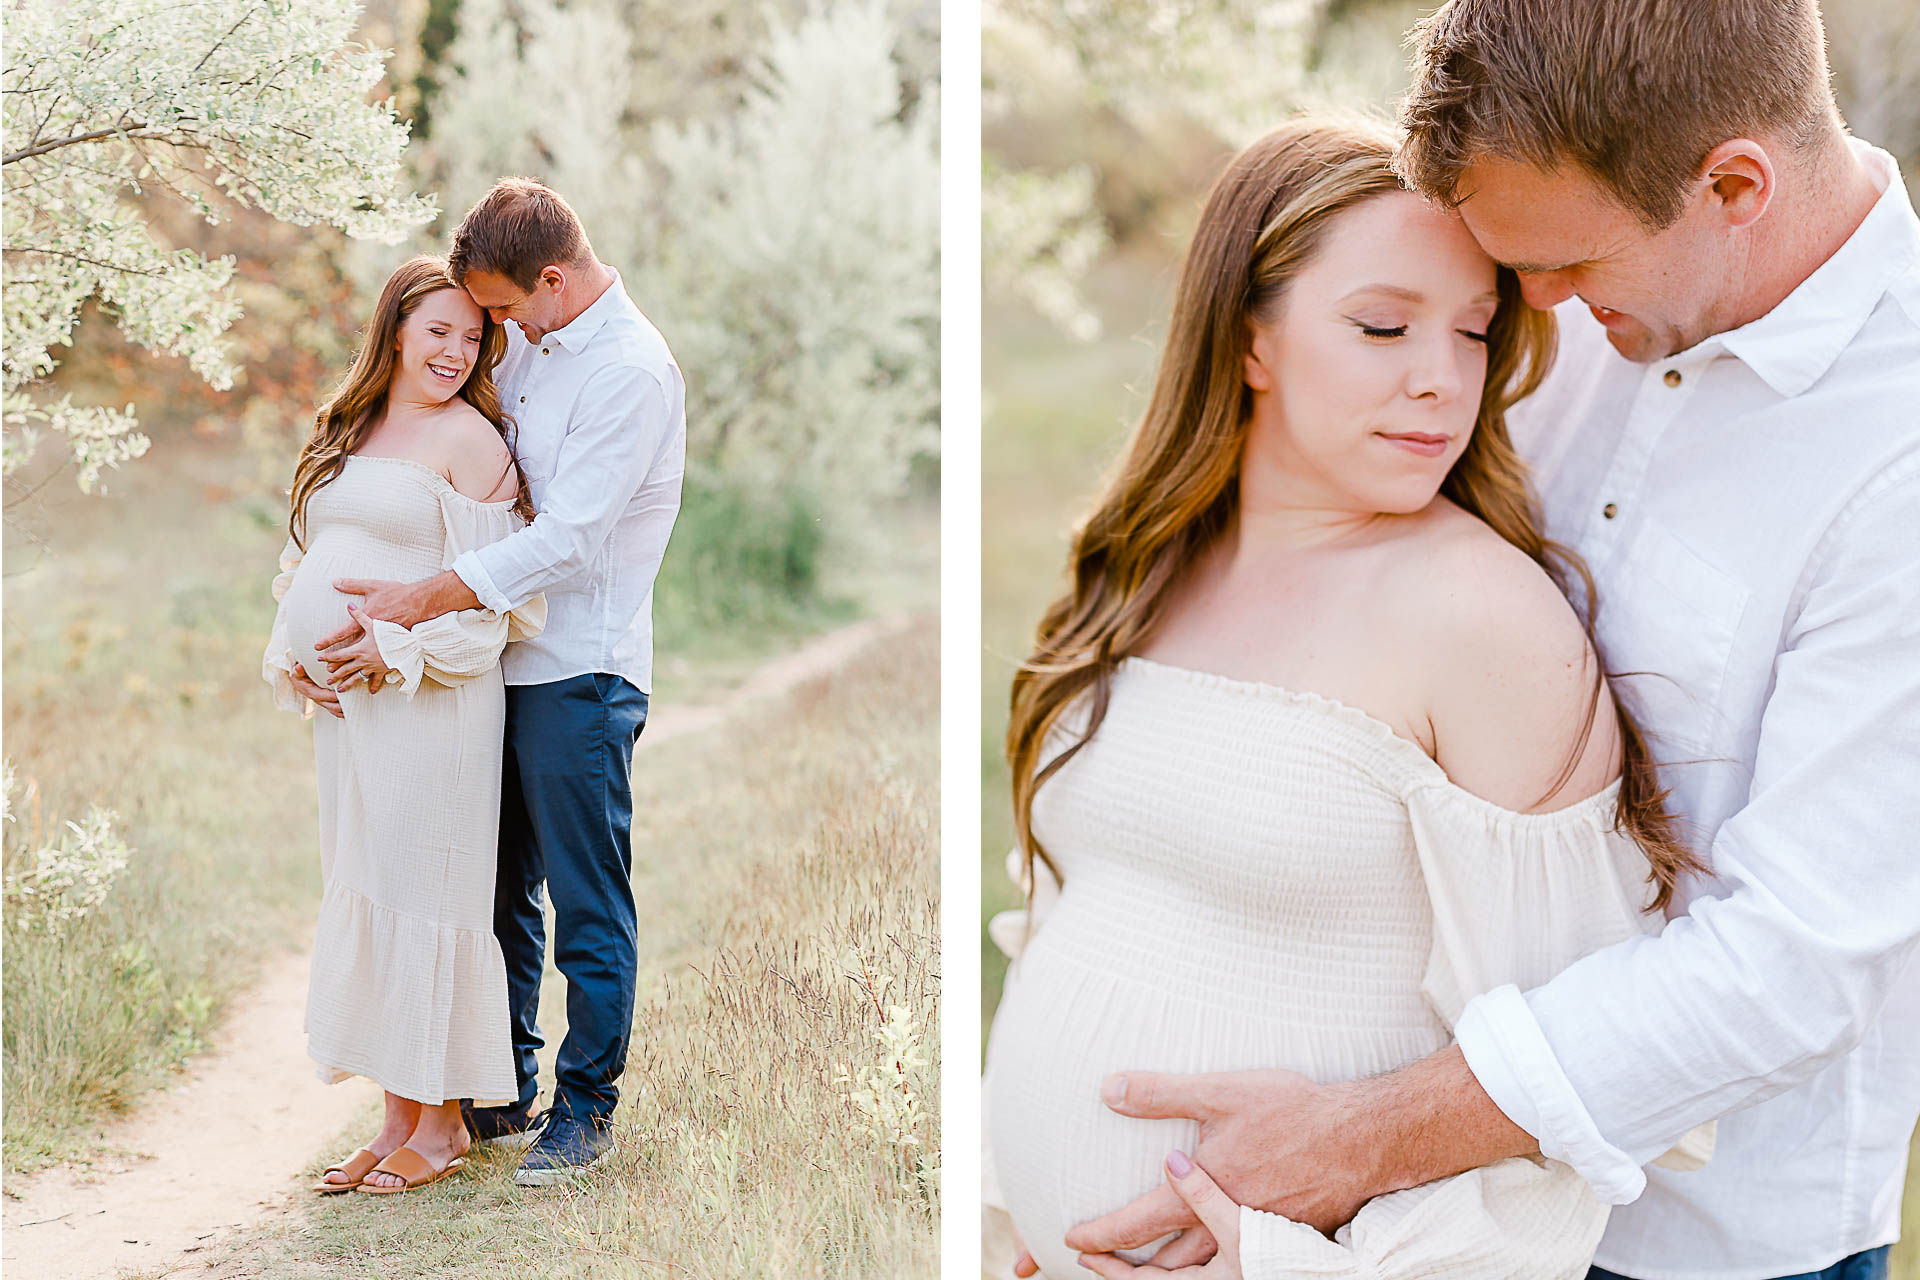 Photos by Plymouth Maternity Photographer Christina Runnals